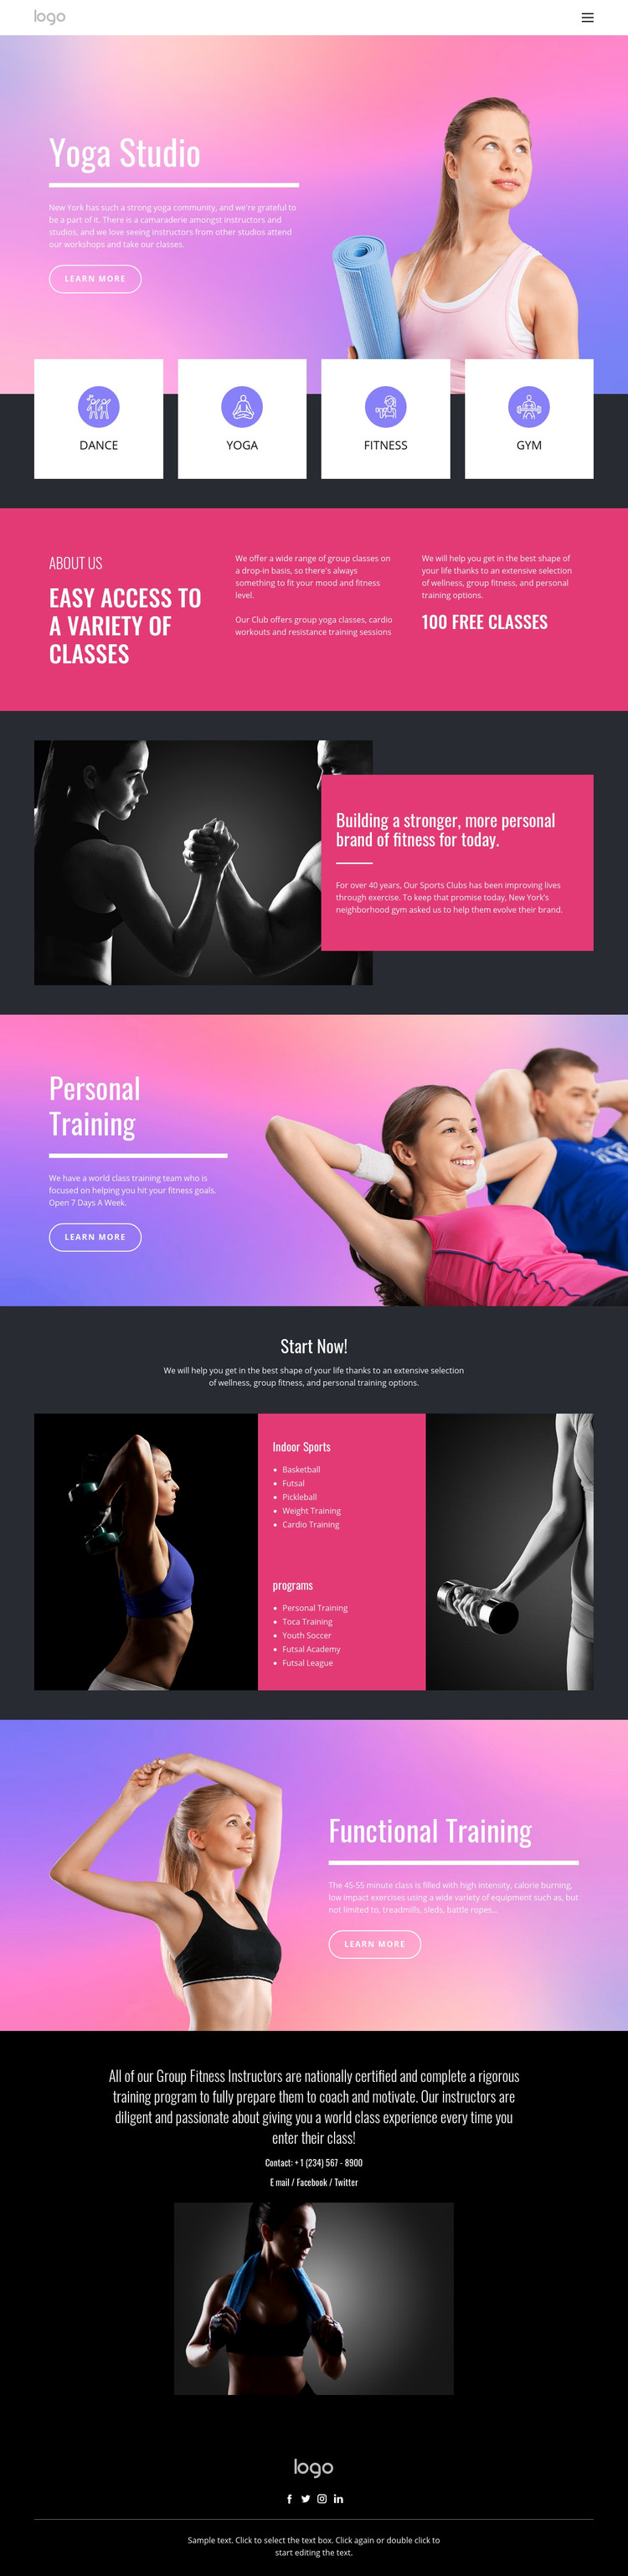 Wellness practice for self-inquiry Homepage Design